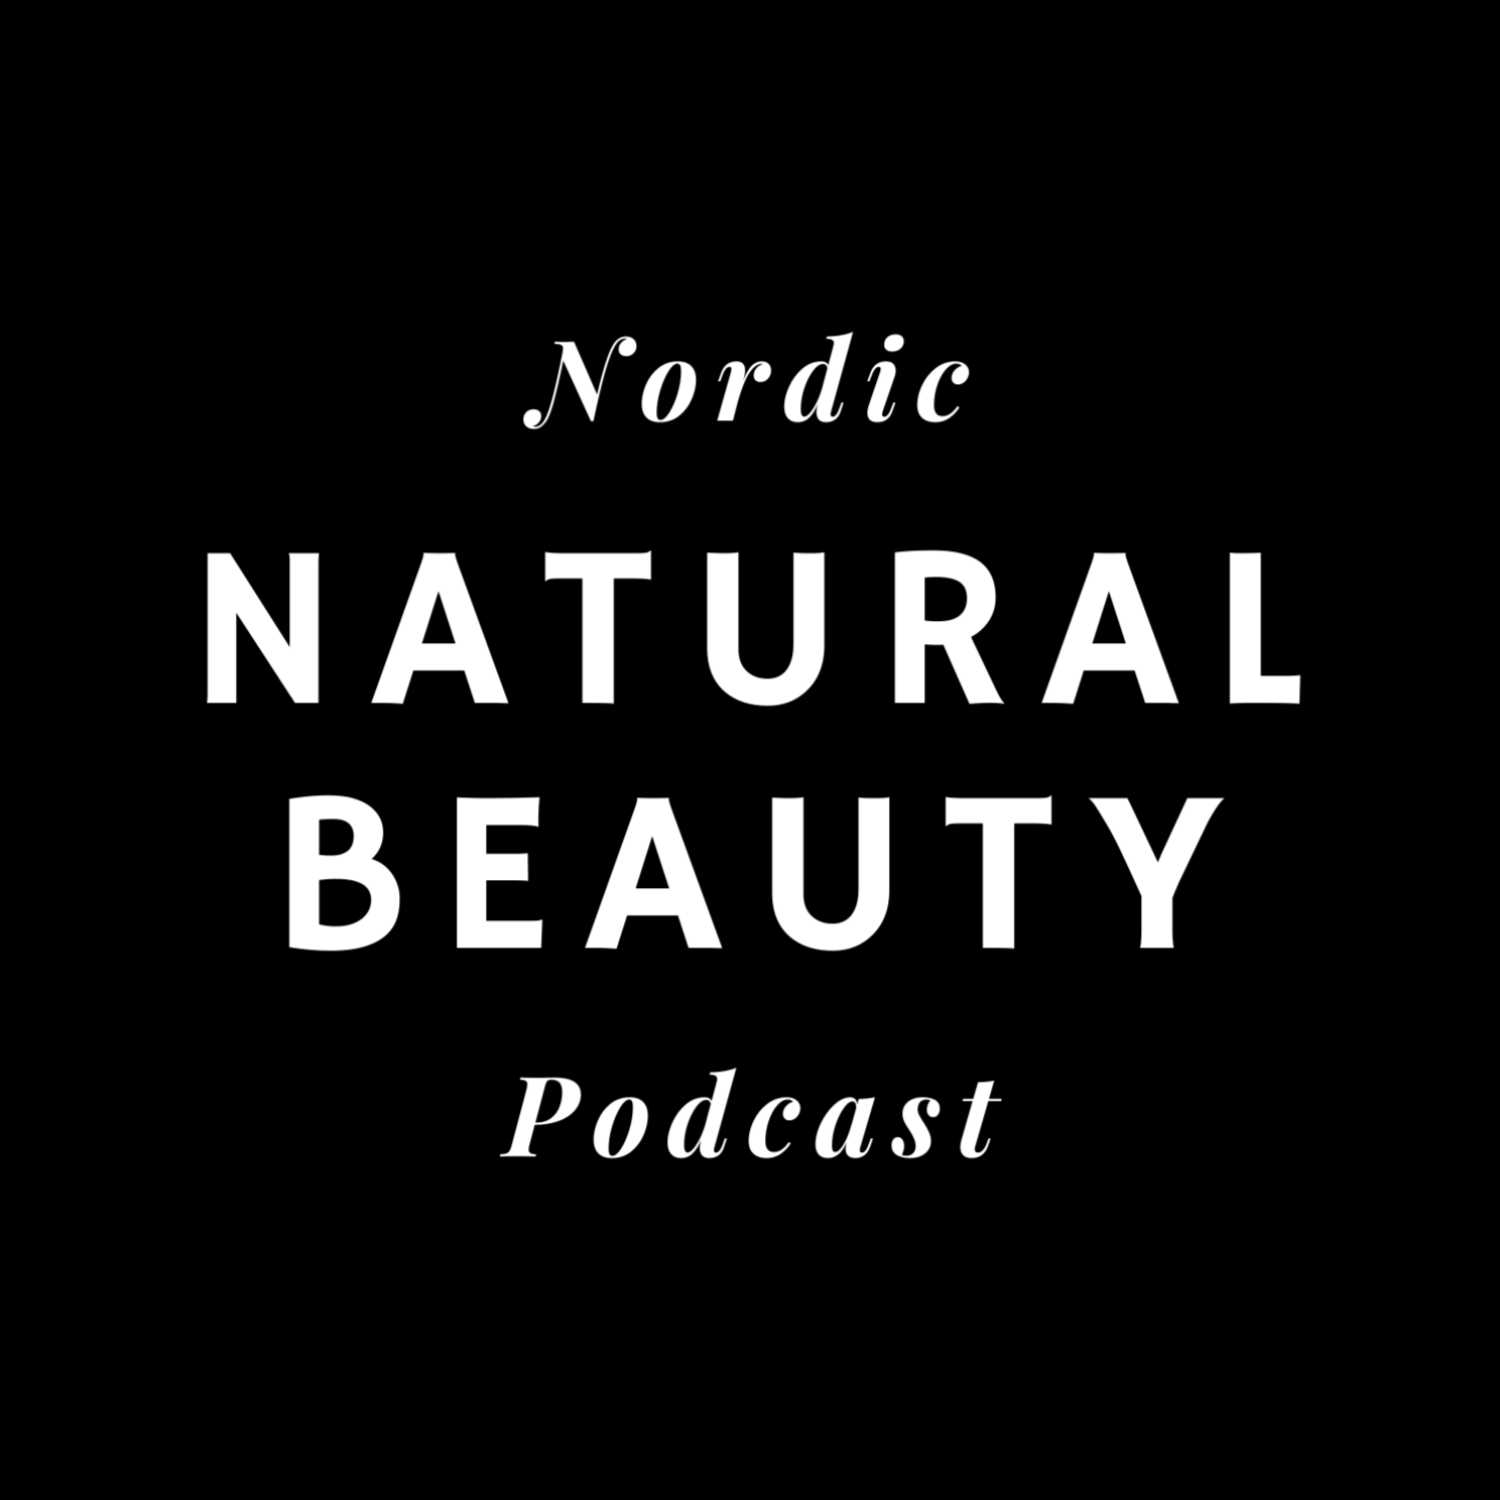 All About Nordic Natural Beauty Awards